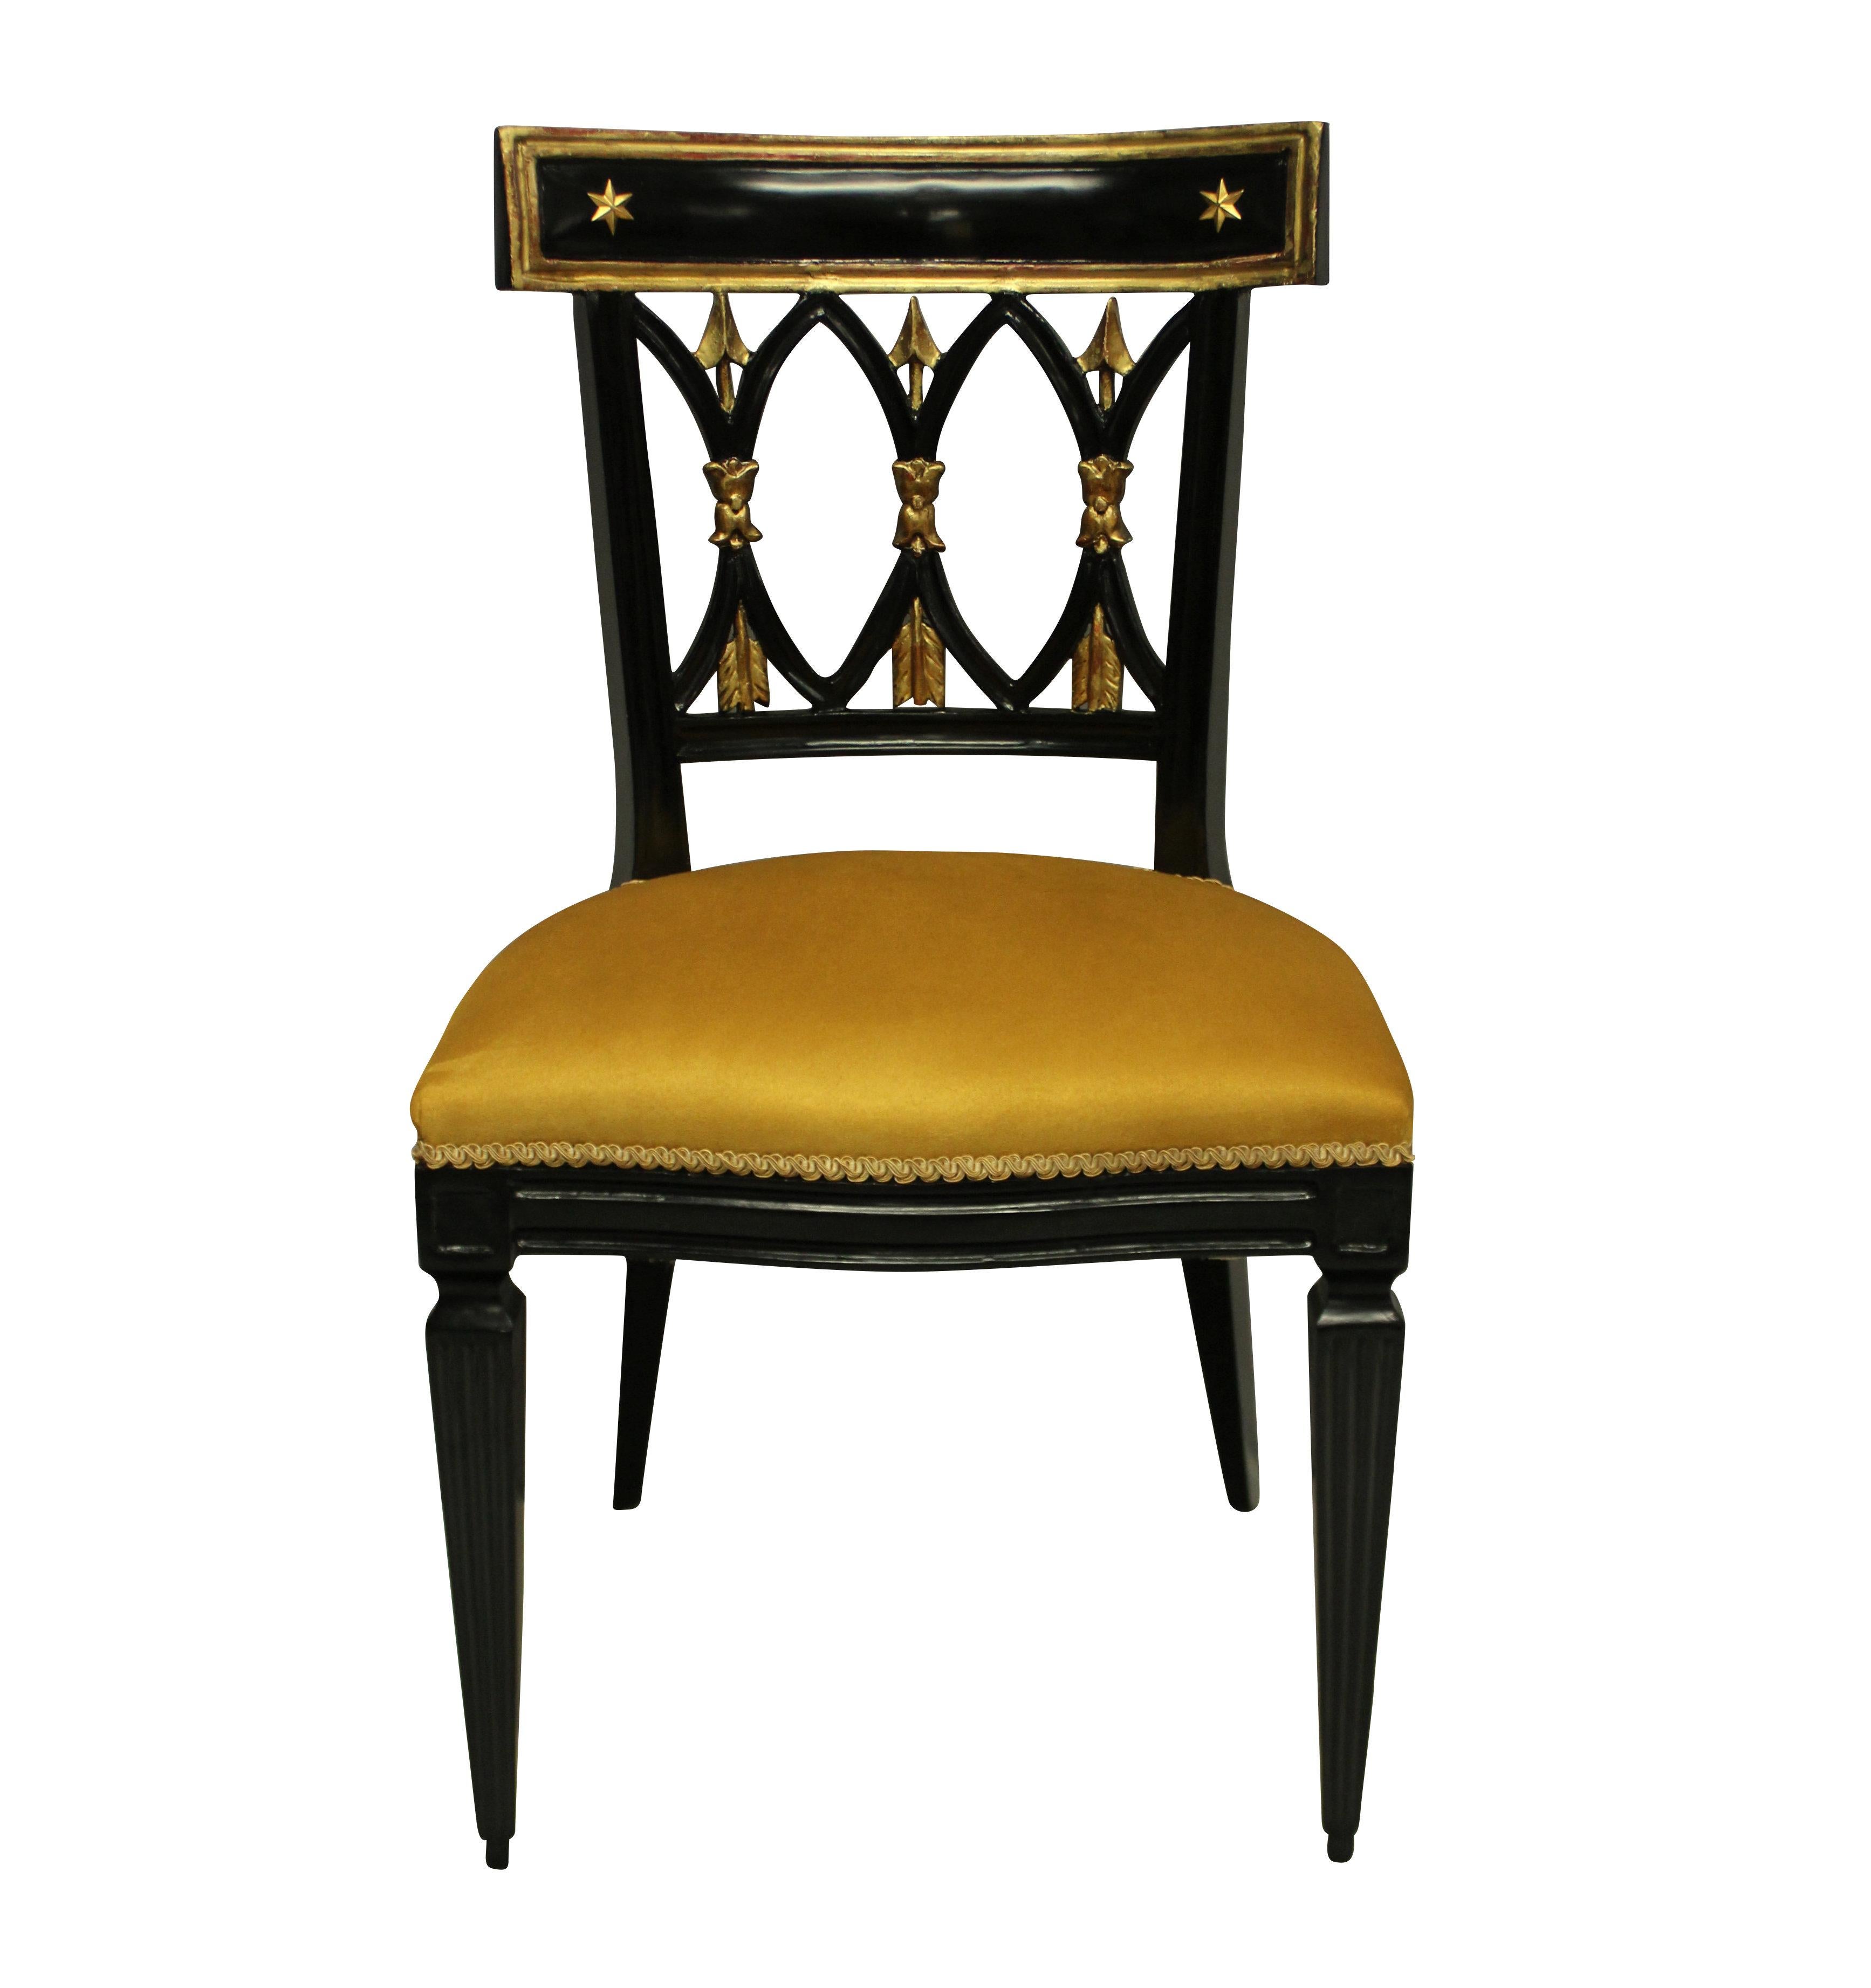 A pair of French ebonised & parcel gilt Empire Revival hall chairs. With gilt bronze stars to the back rail and depicting arrows. Newly upholstered in mustard faux suede.